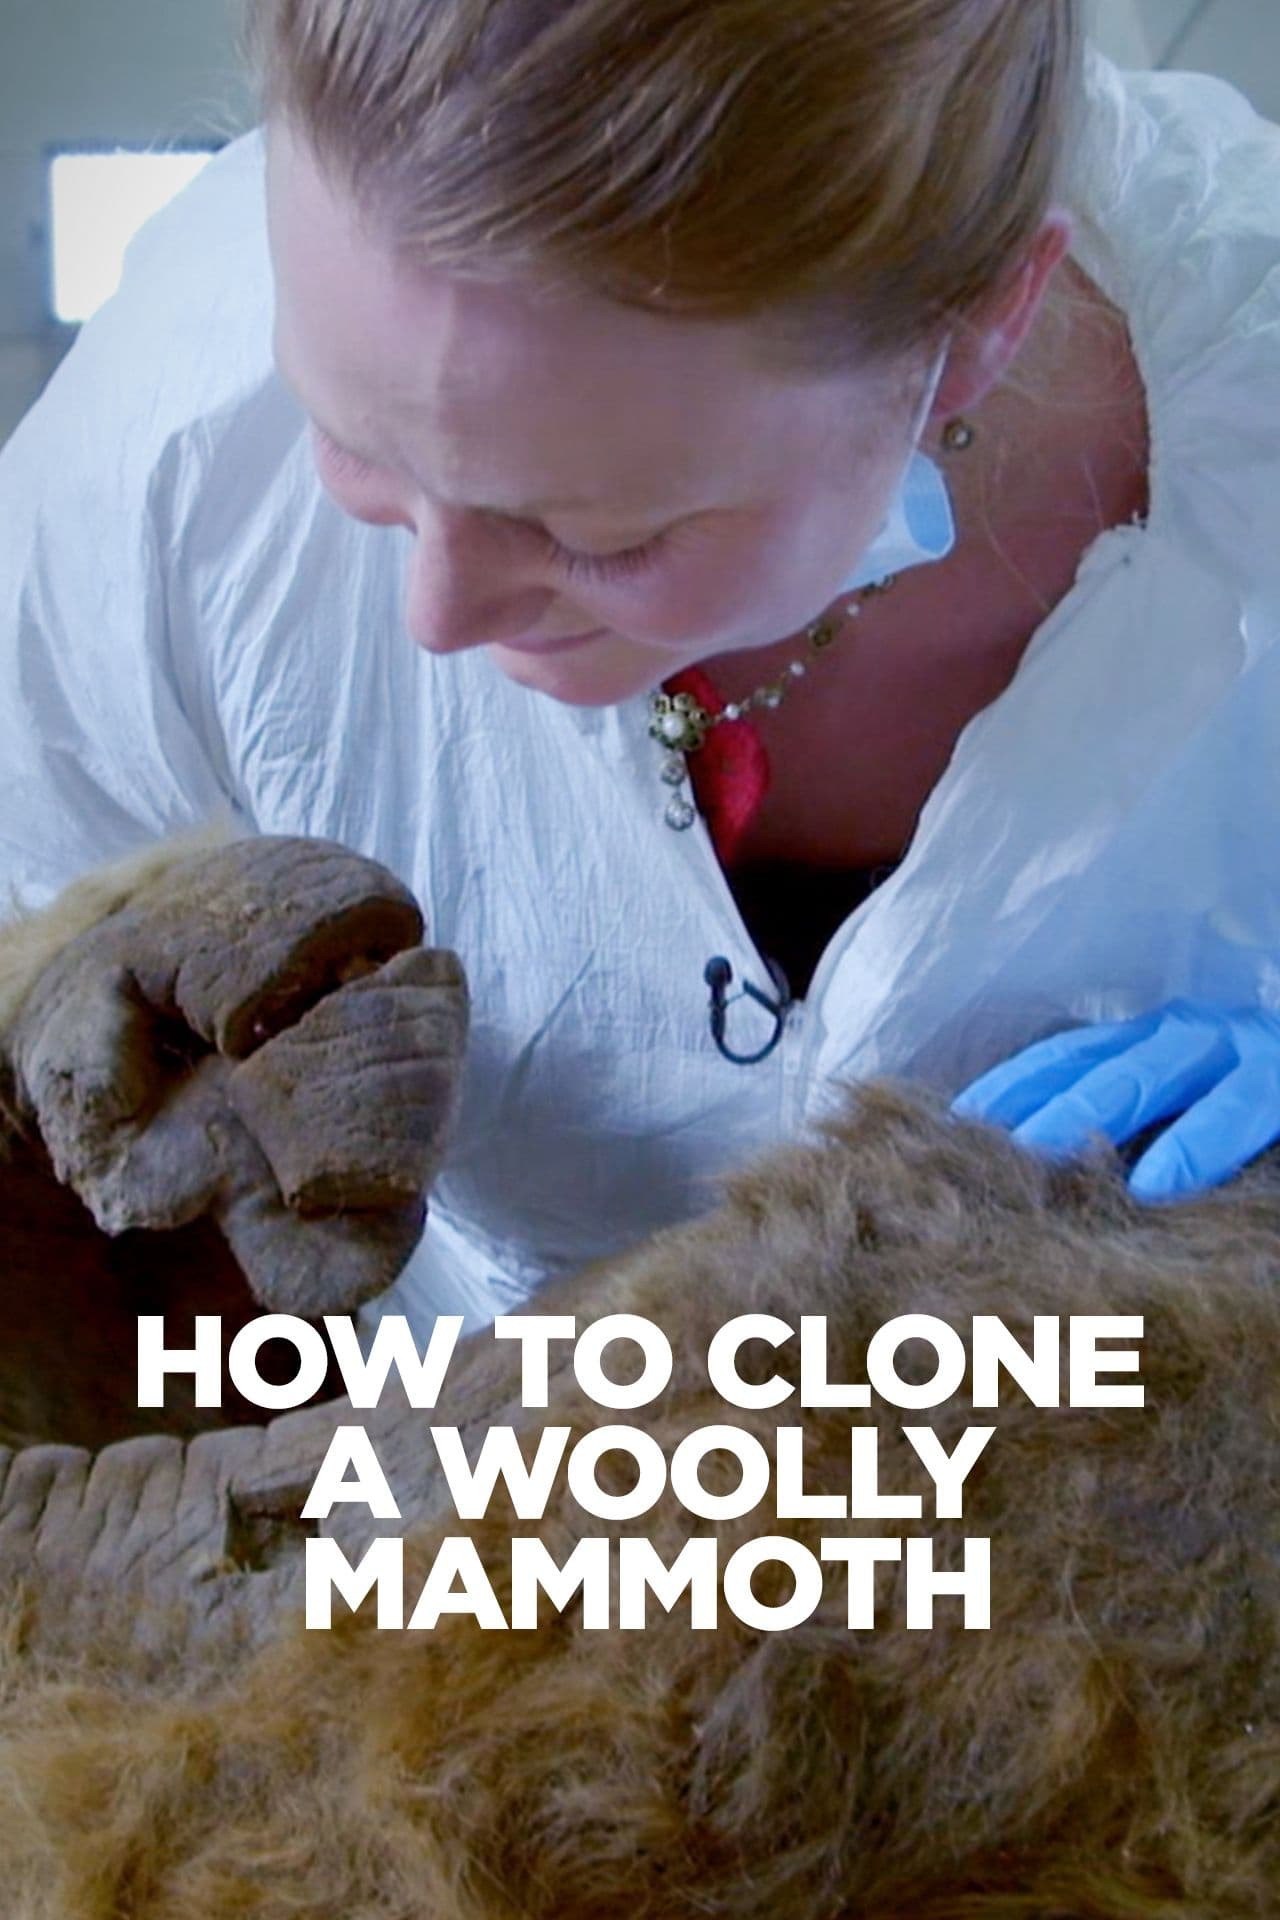 How To Clone A Woolly Mammoth